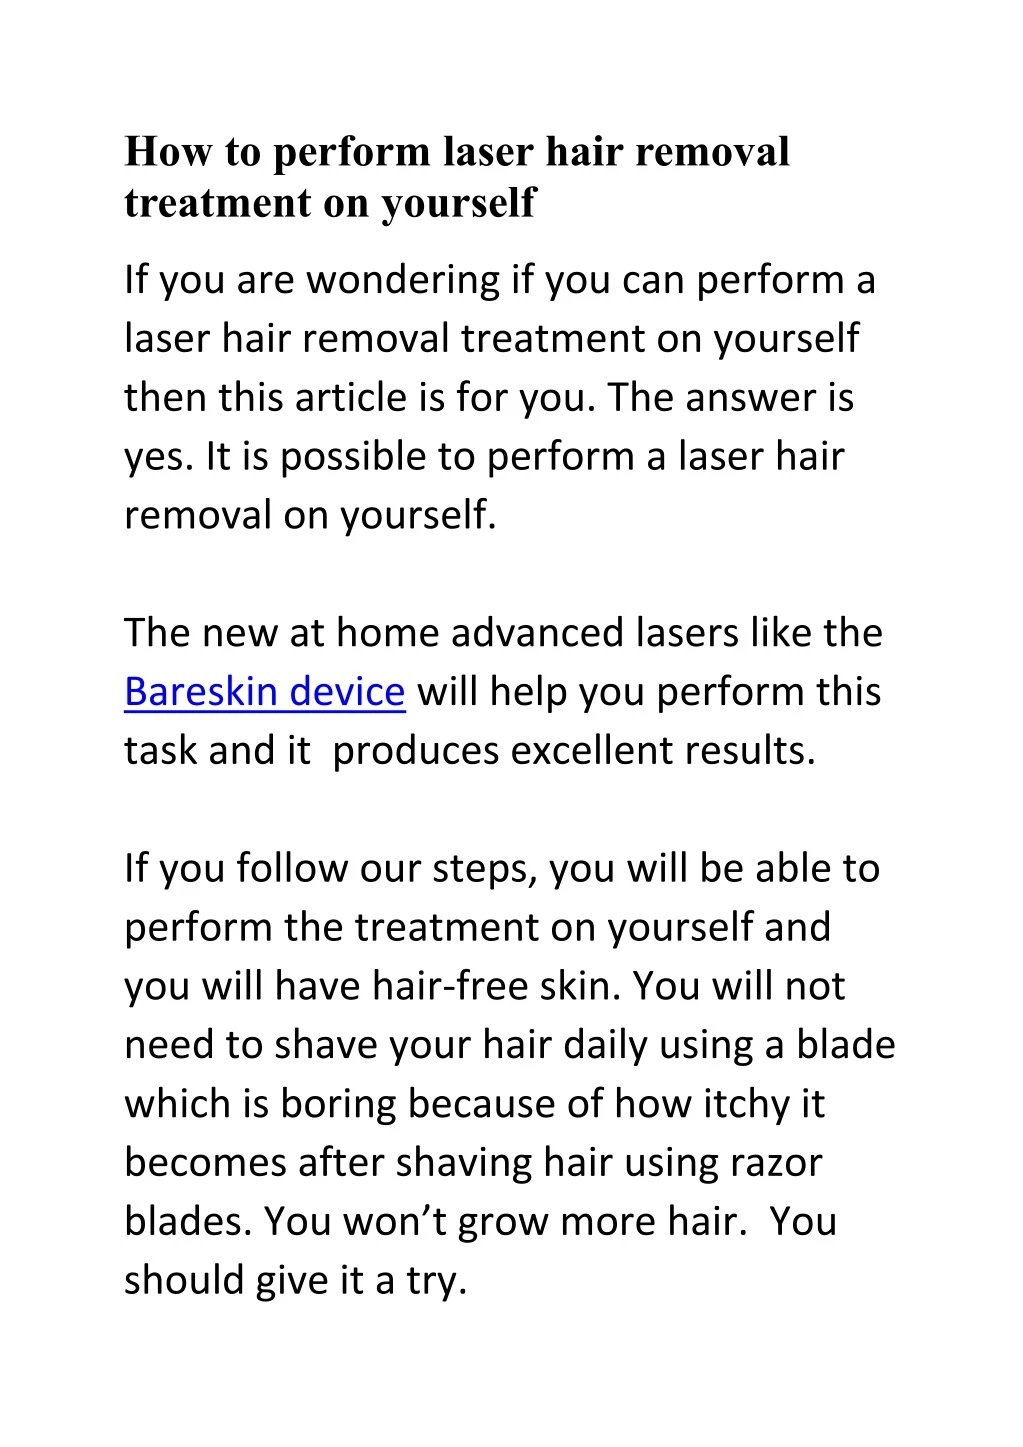 how to perform laser hair removal treatment